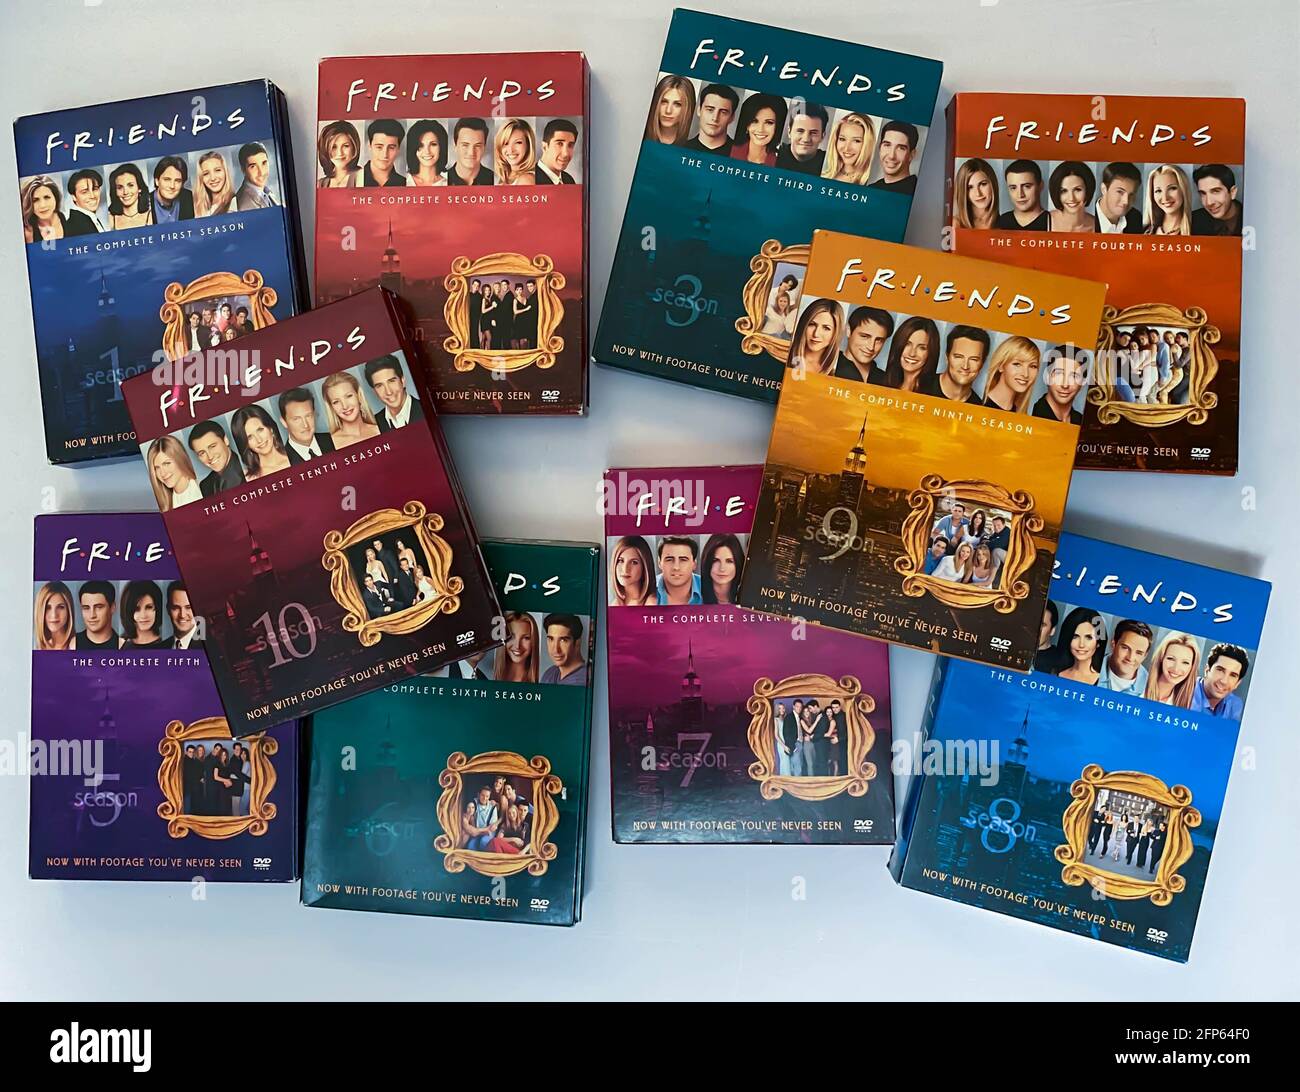 Friends DVD box sets. American comedy television sitcom by David Crane & Marta Kauffman aired on NBC for 10 seasons. Airing on HBO max FRIENDS reunion Stock Photo